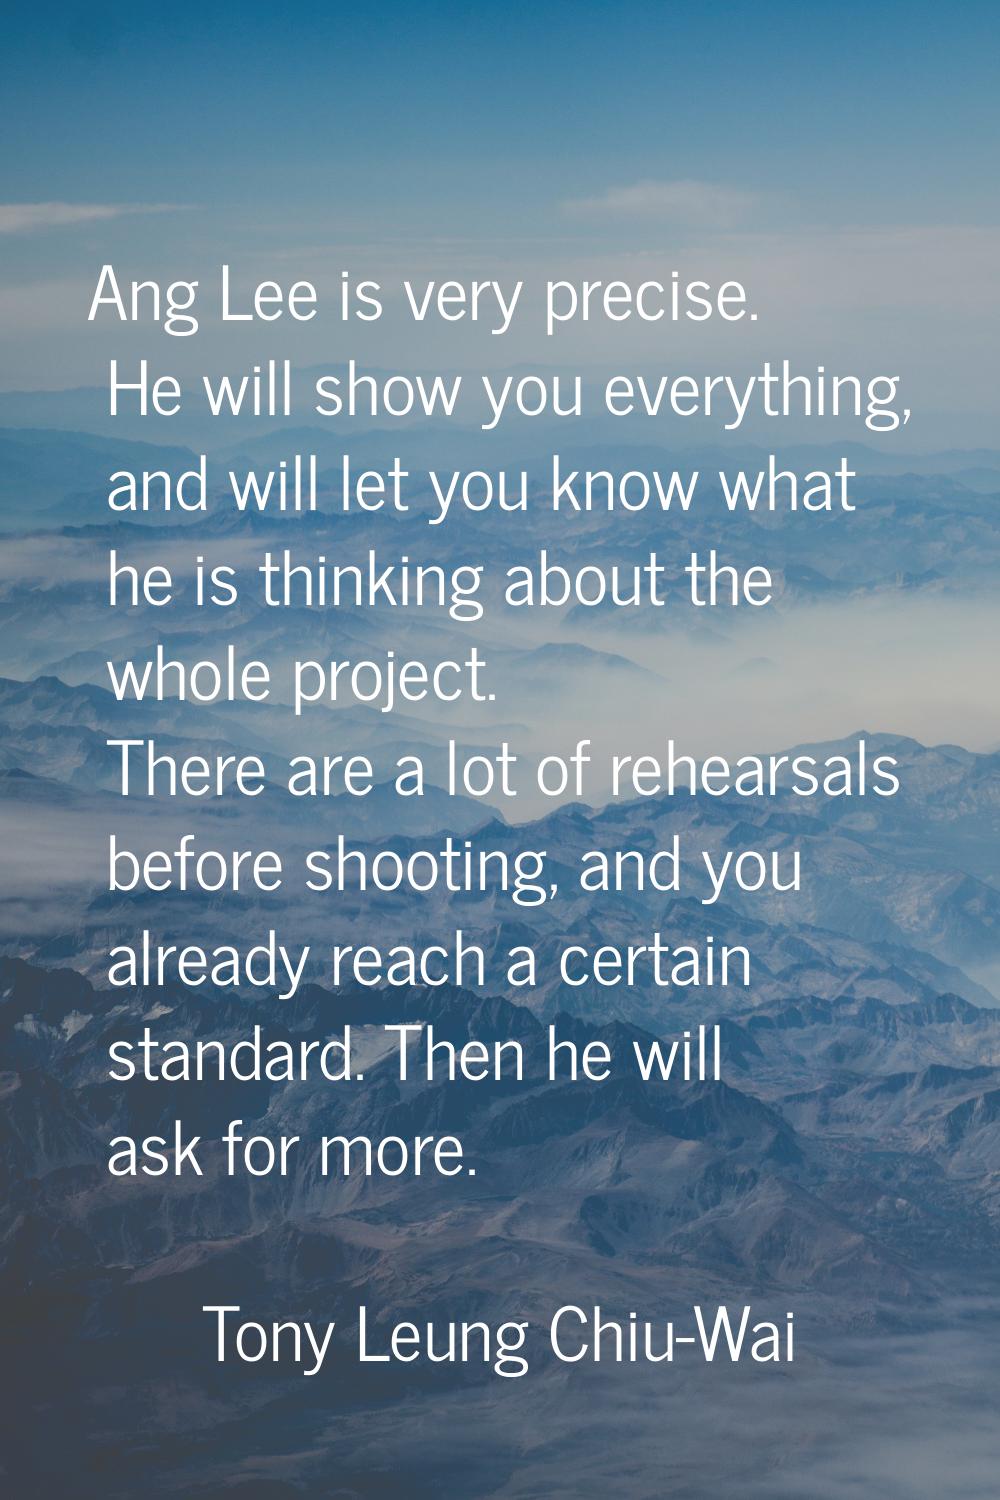 Ang Lee is very precise. He will show you everything, and will let you know what he is thinking abo